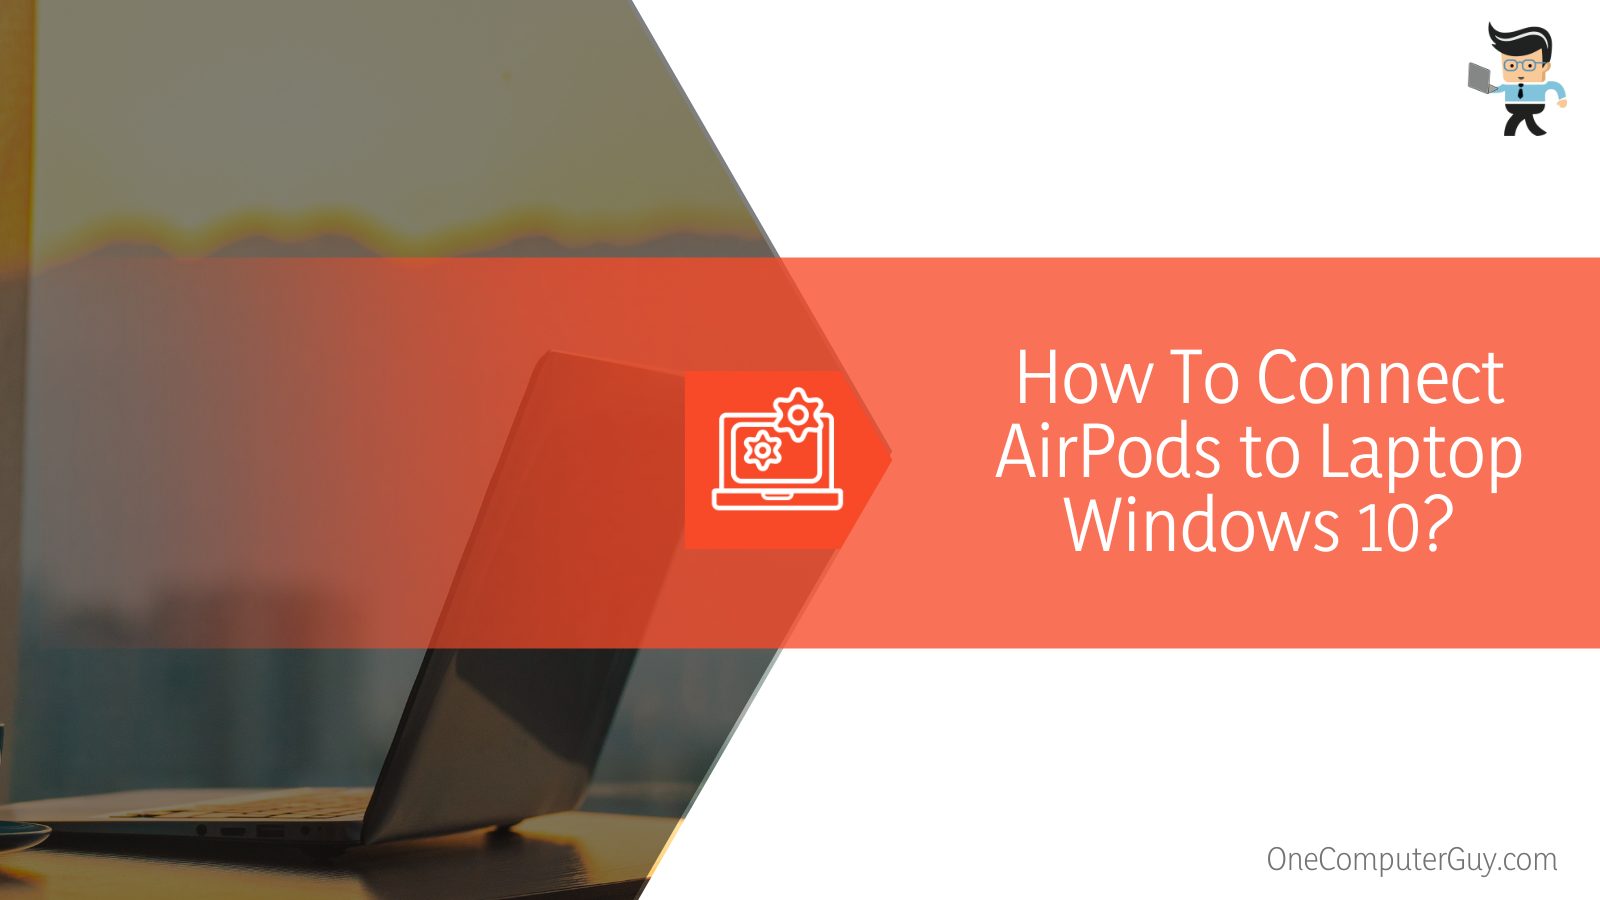 Connecting AirPods to Windows 10